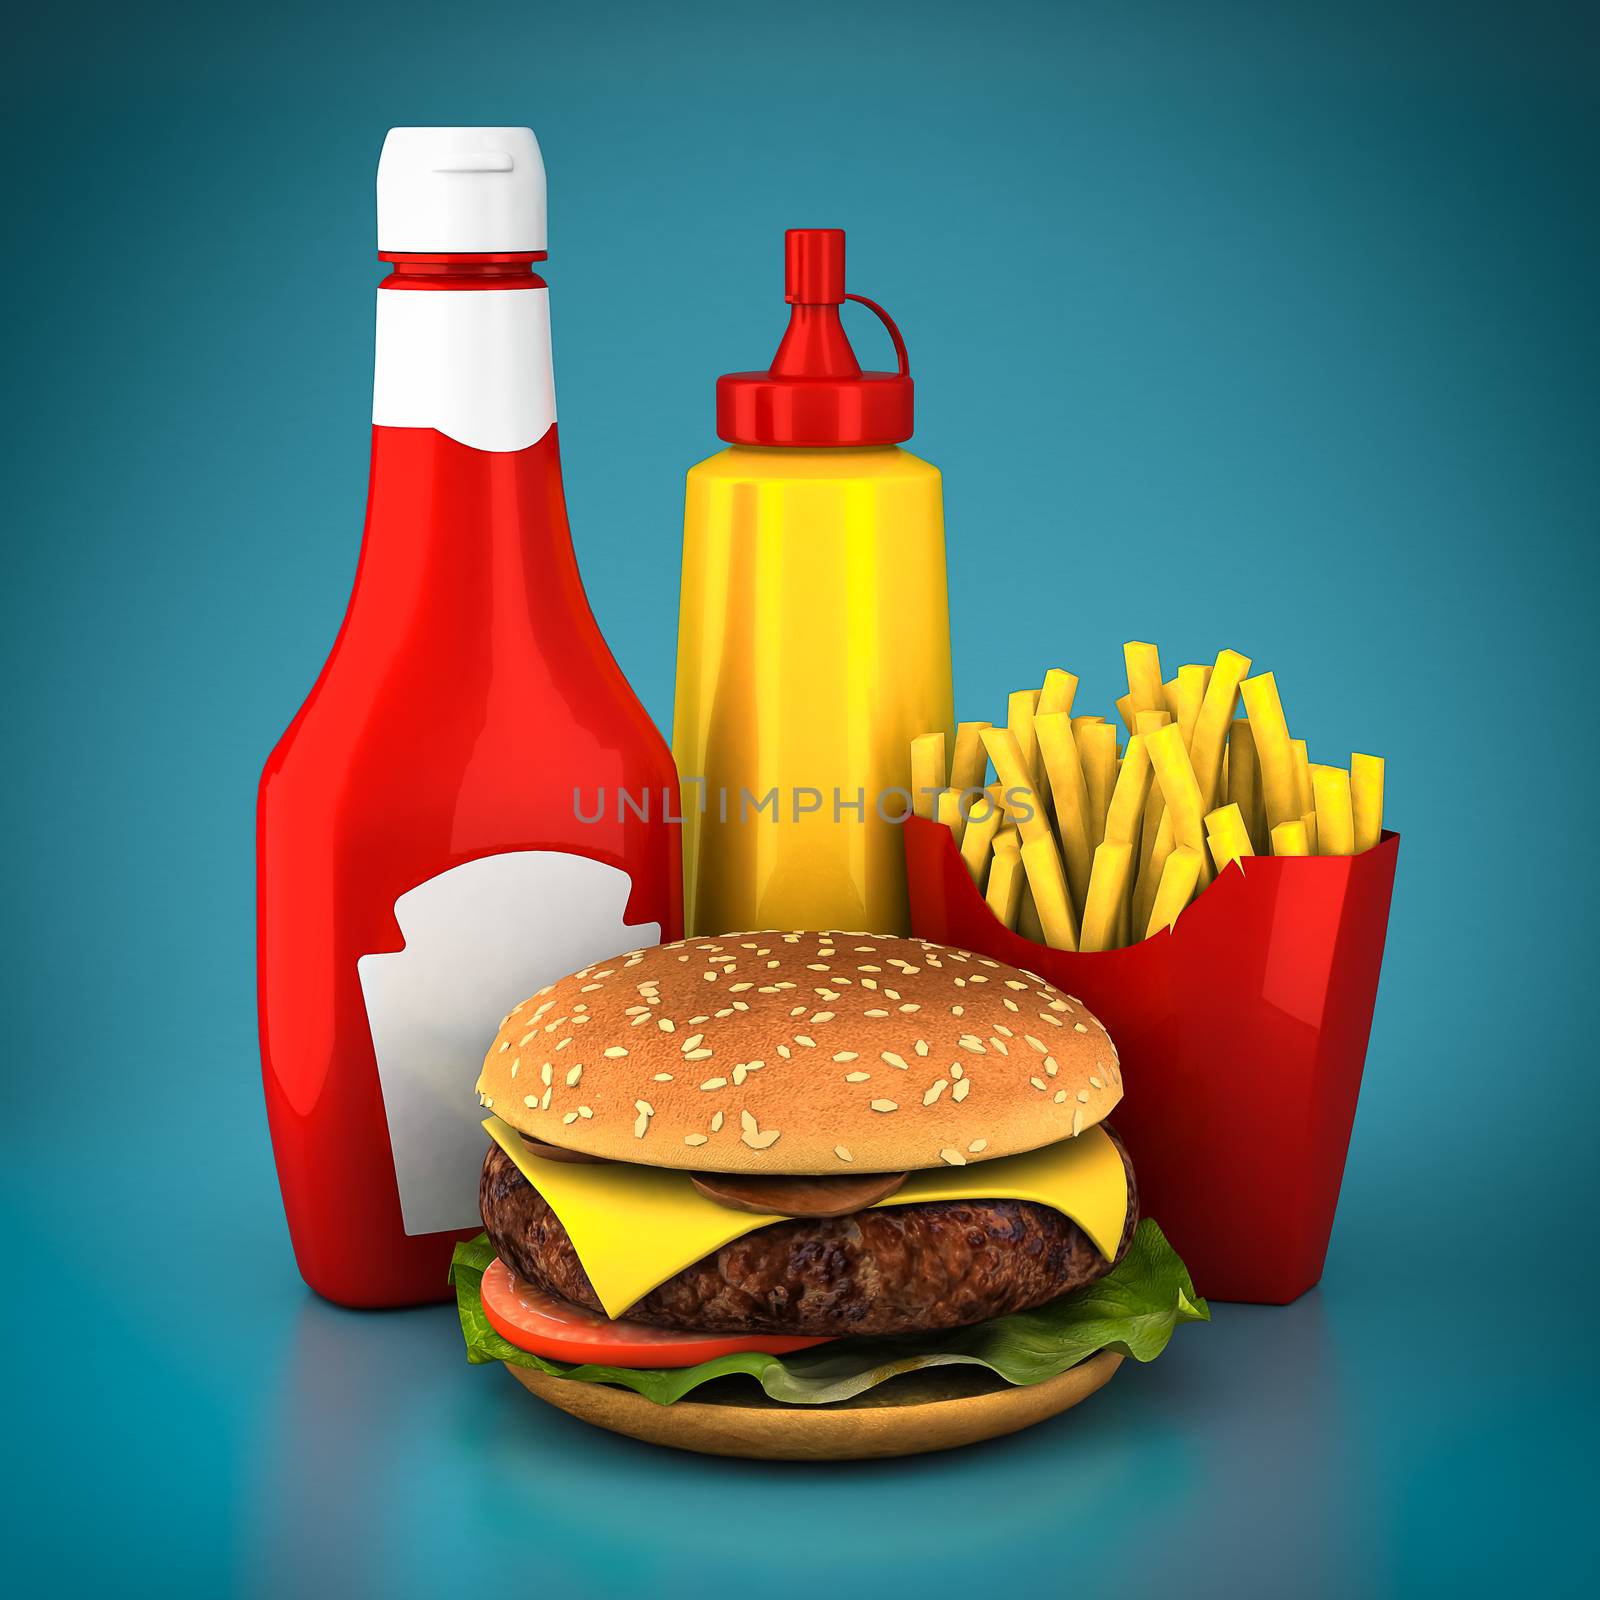 Hamburger, french fries, mustard and ketchup on a blue background